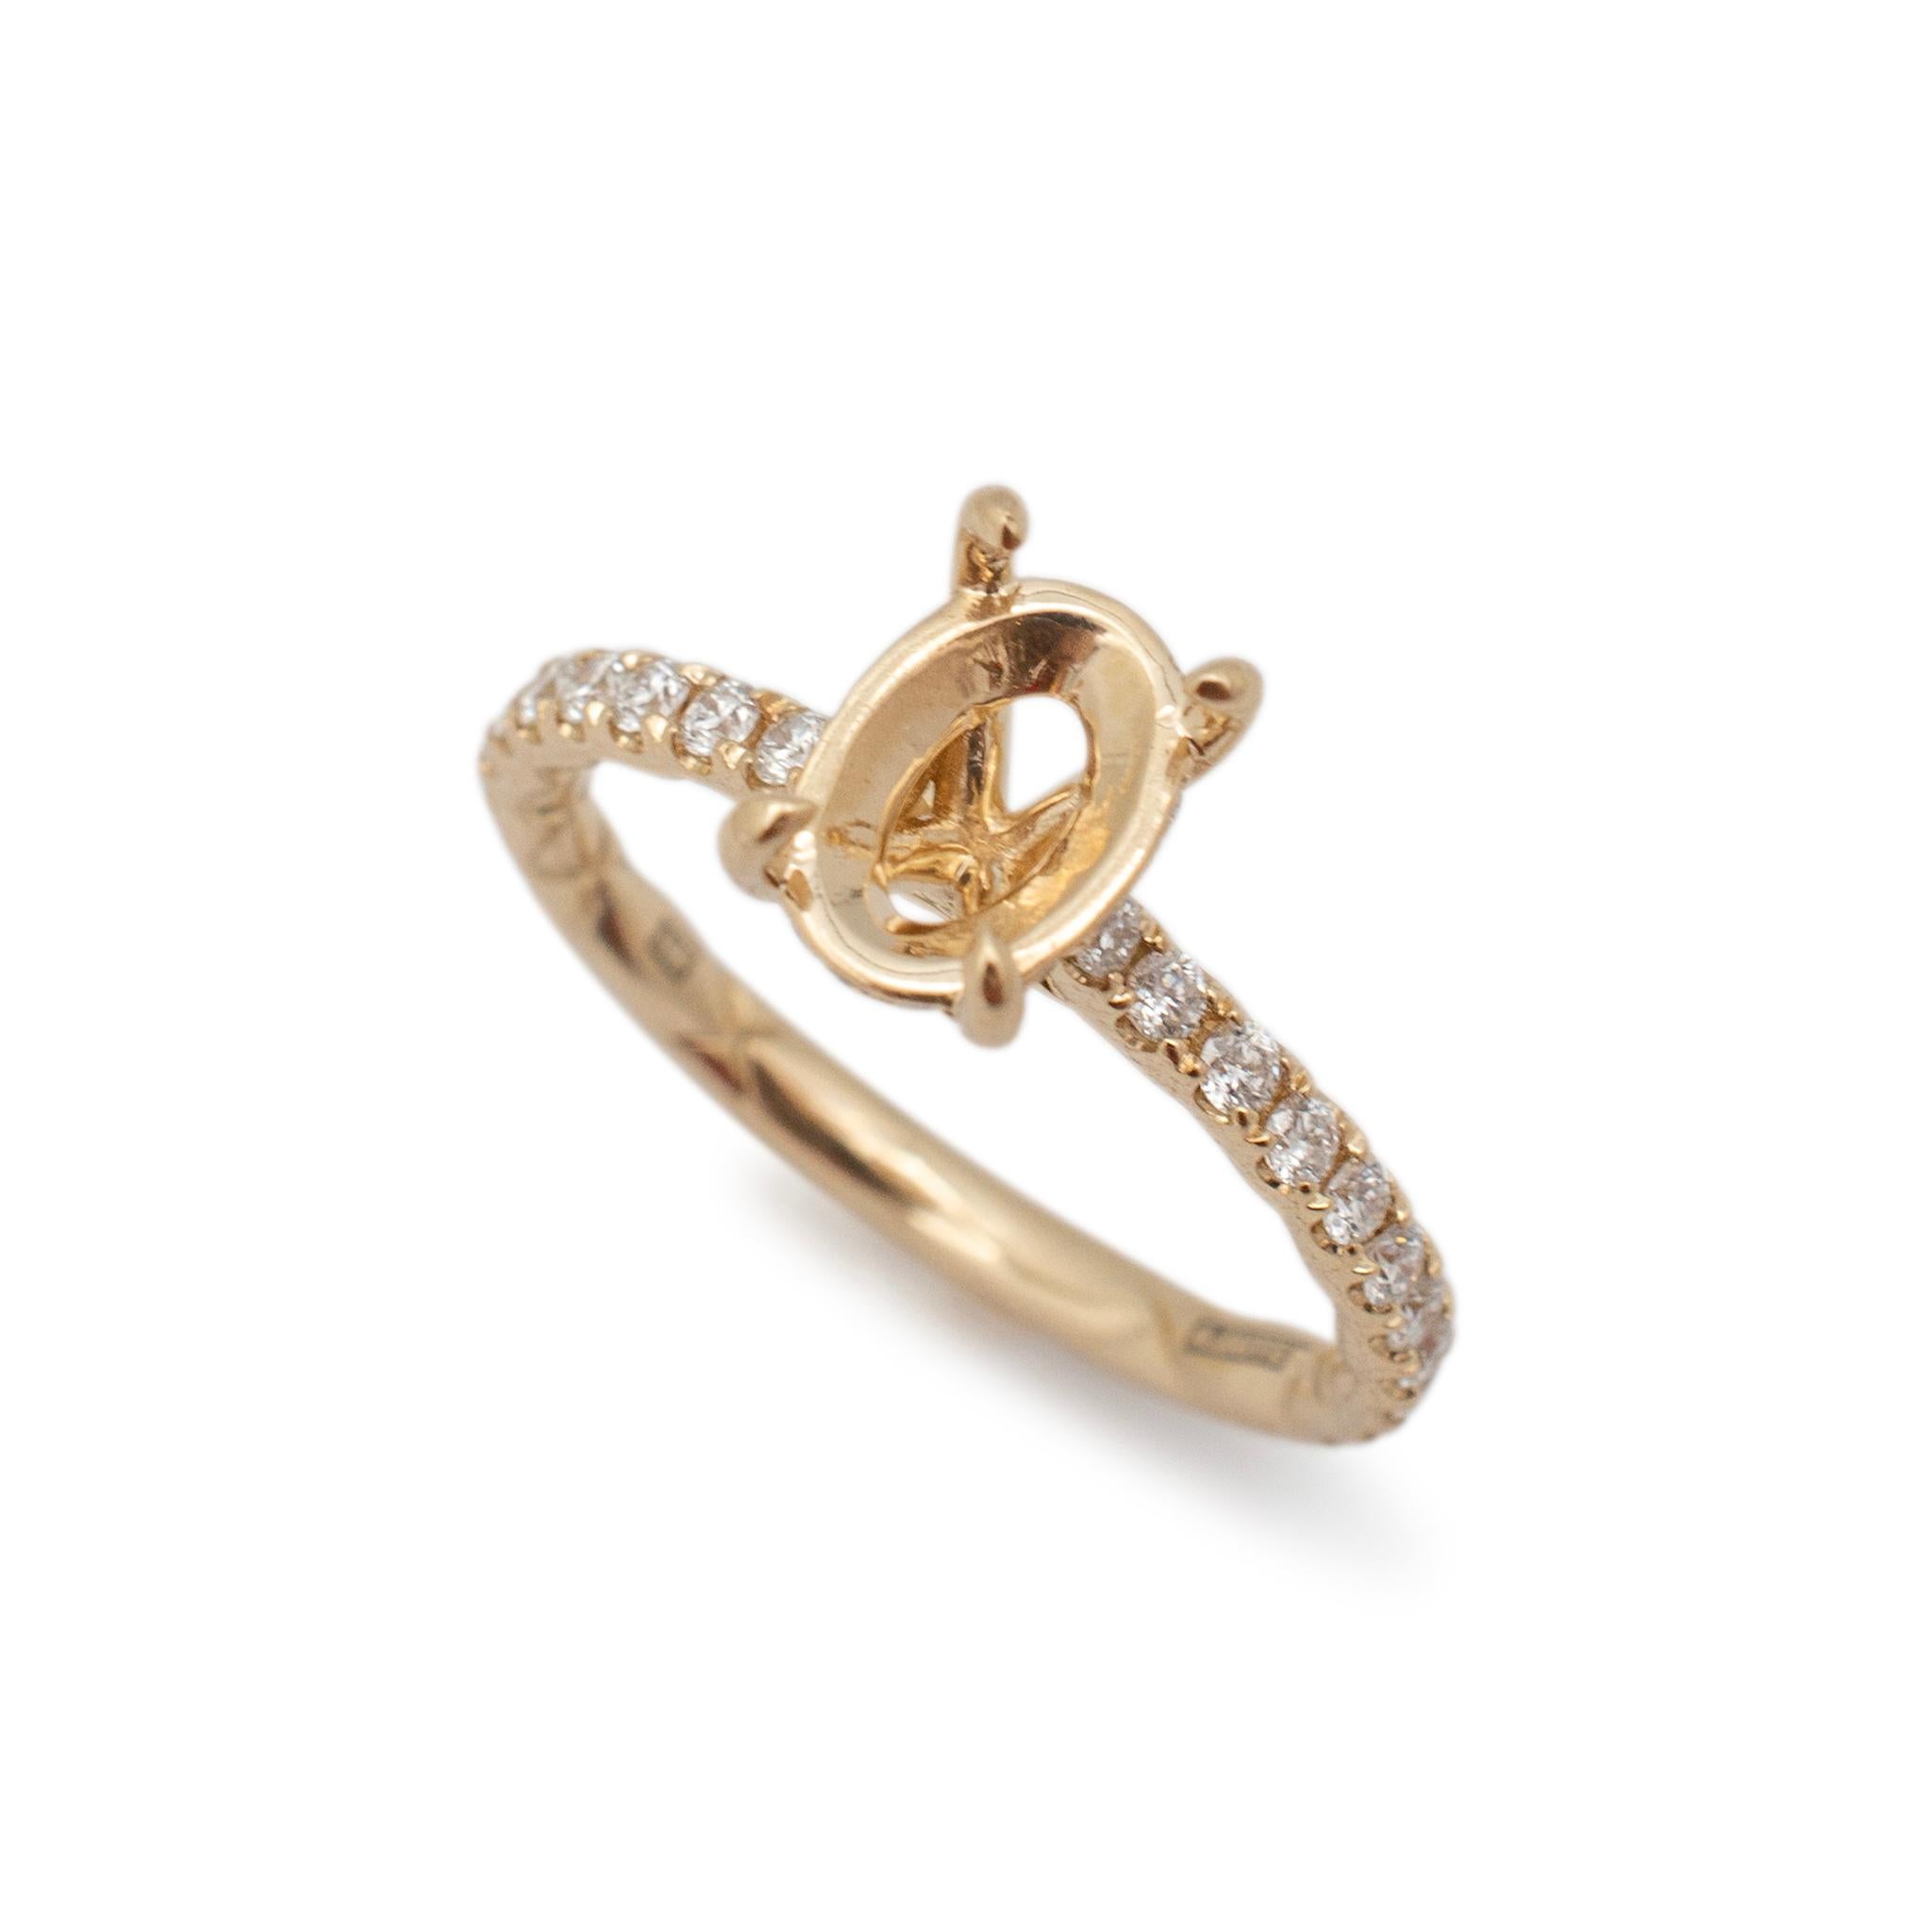 Brand: A. JAFFE

Gender: Ladies

Metal Type: 14K Yellow Gold

Size: 6.5

Shank Maximum Width: 2.00 mm

Weight: 2.84 Grams

Ladies 14K yellow gold diamond engagement semi-mount accented ring with a half round shank. The metal was tested and